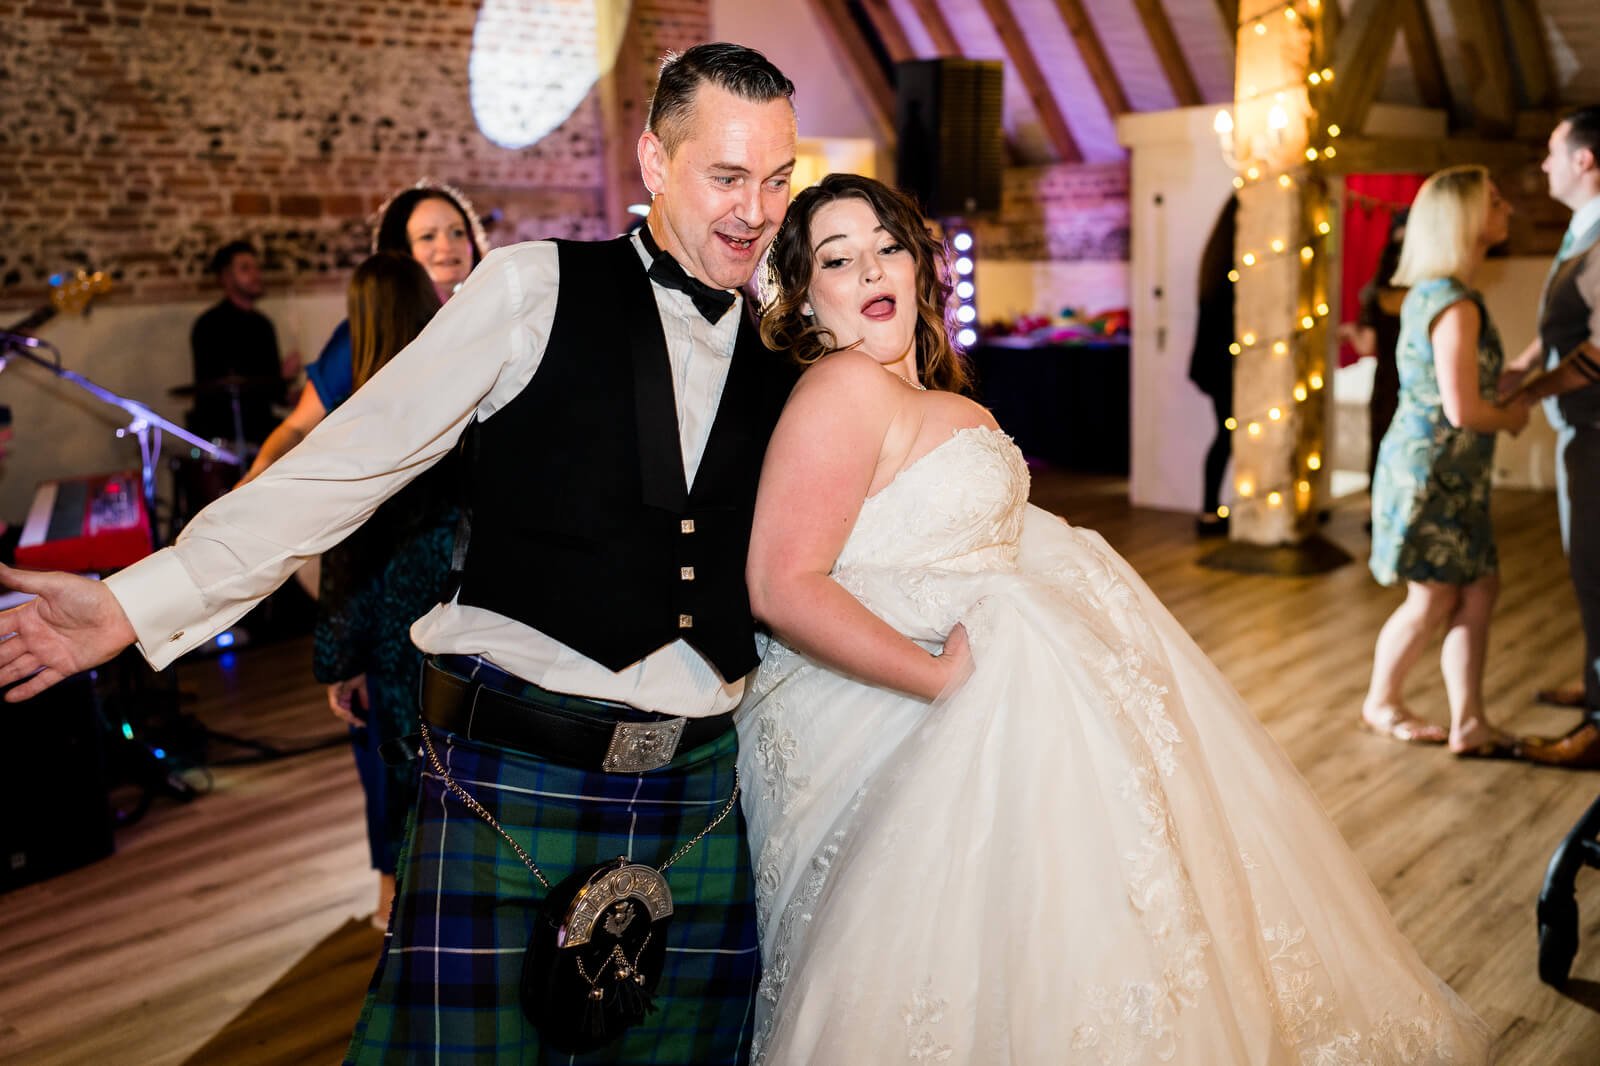 bride dancing with best man at barford park wedding venue with band the deloreons